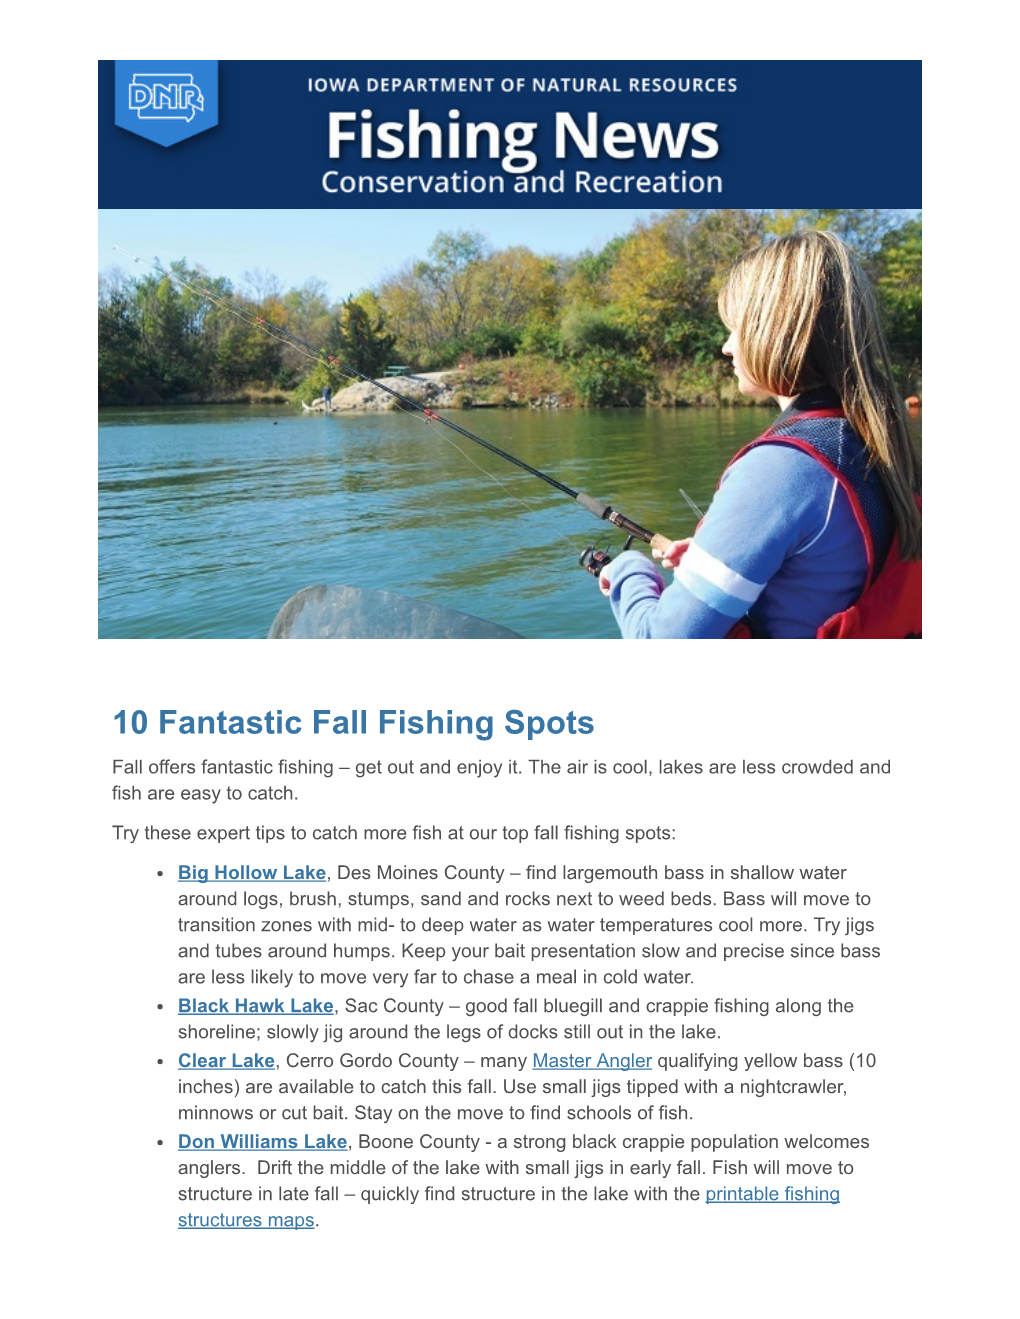 10 Fantastic Fall Fishing Spots Fall Offers Fantastic Fishing – Get out and Enjoy It